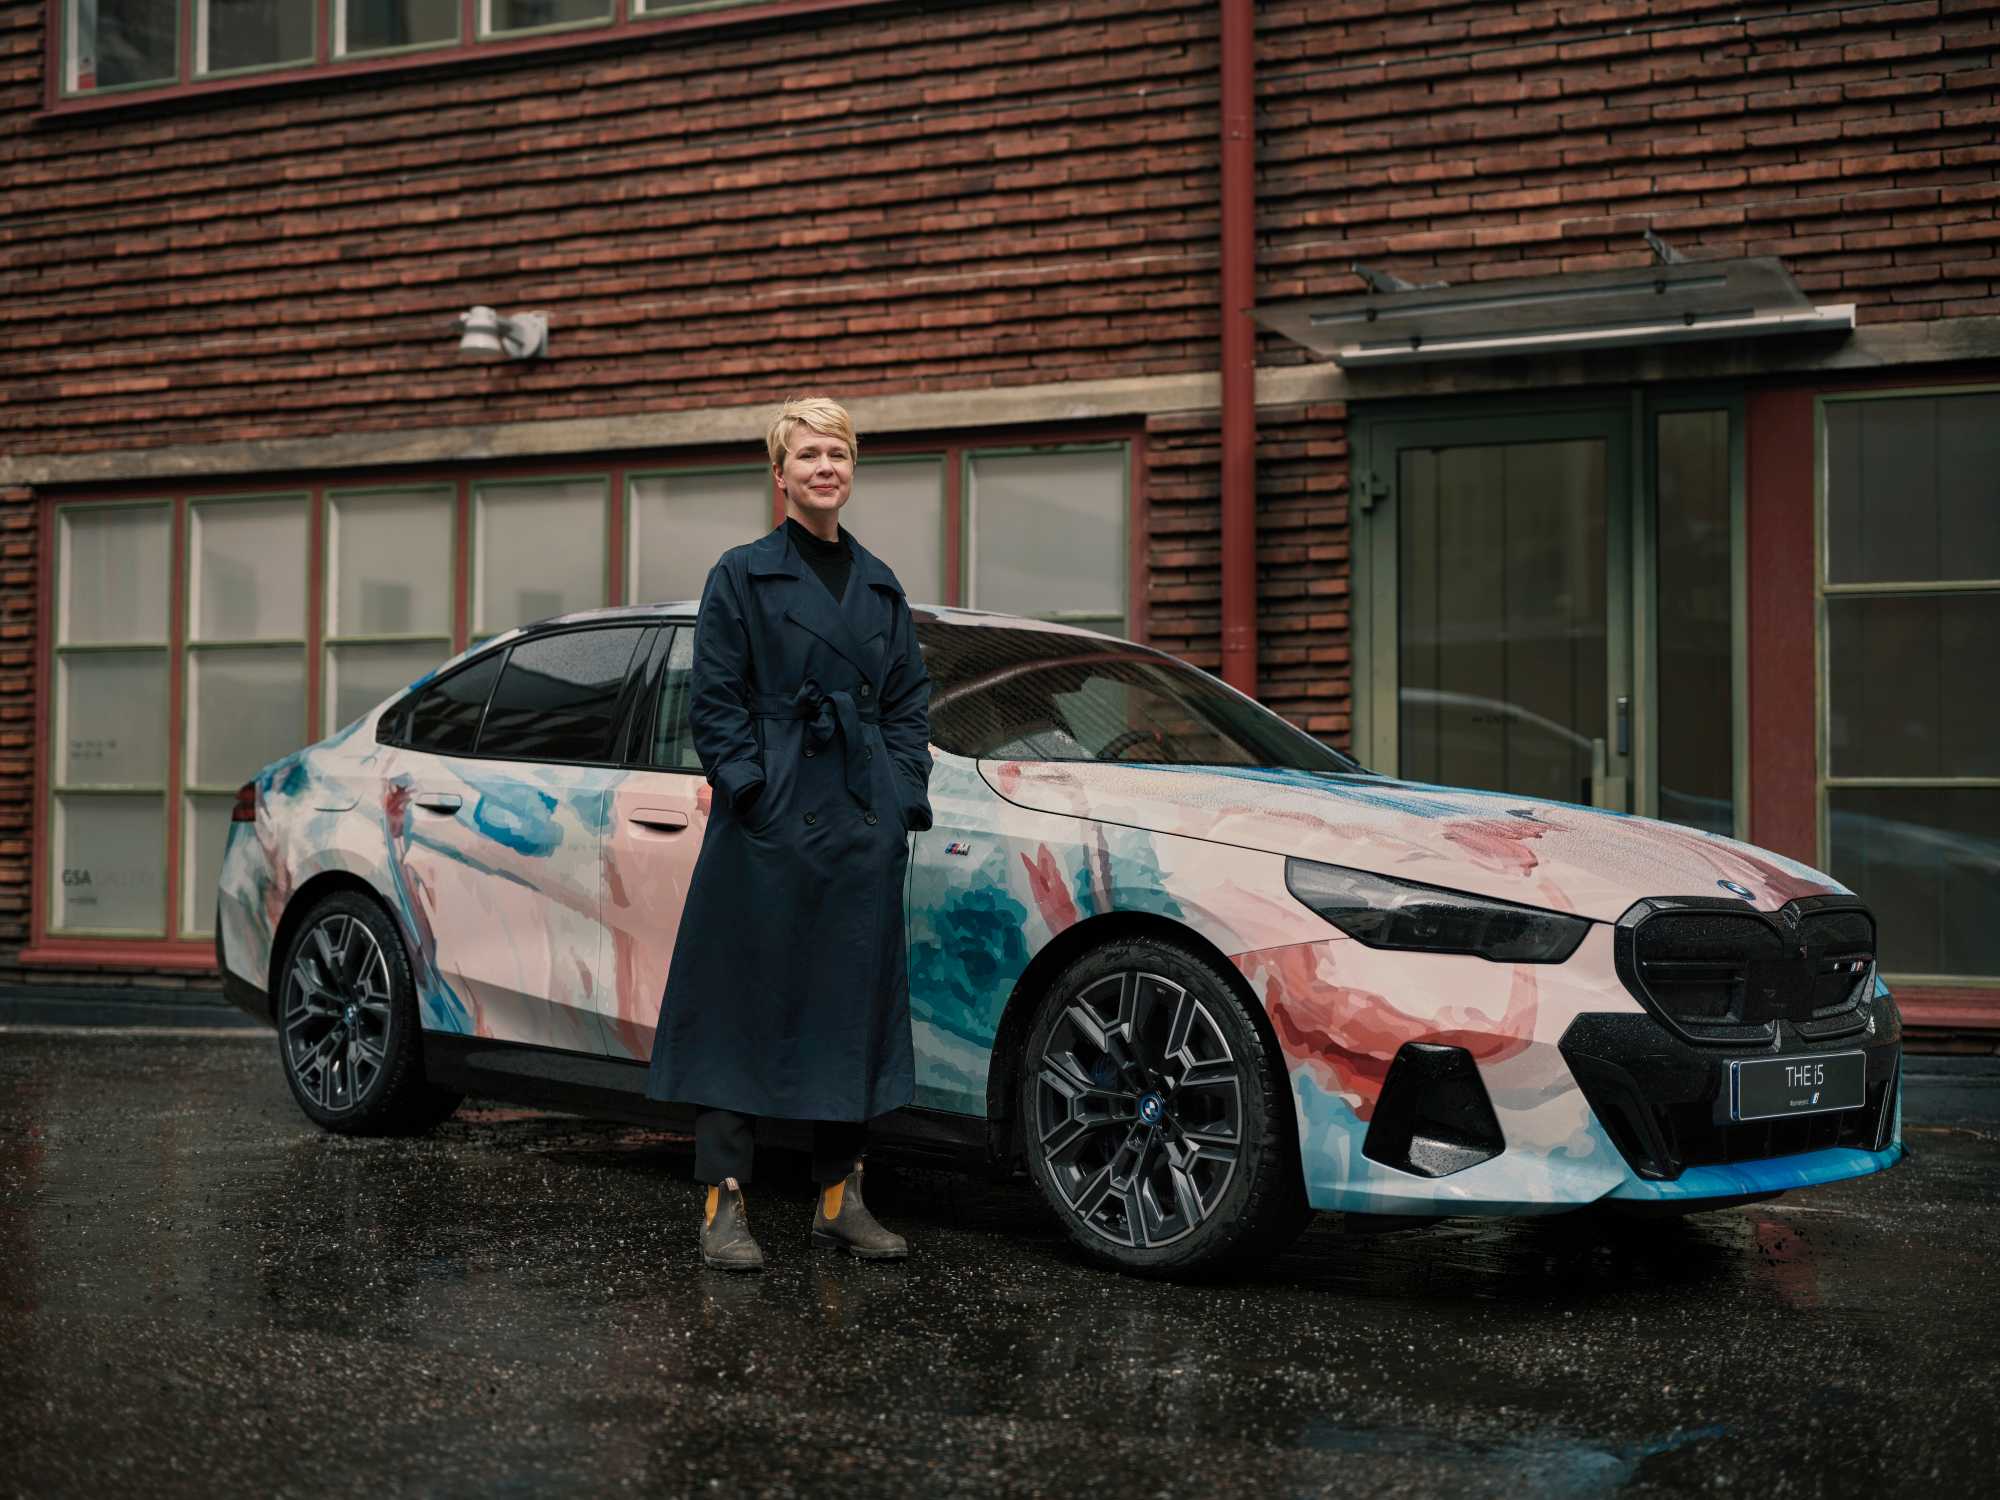 Swedish artist Katrin Westman creates this year's mobile artwork at Market Art Fair. Initiative is inspired by the famous BMW Art Car series.